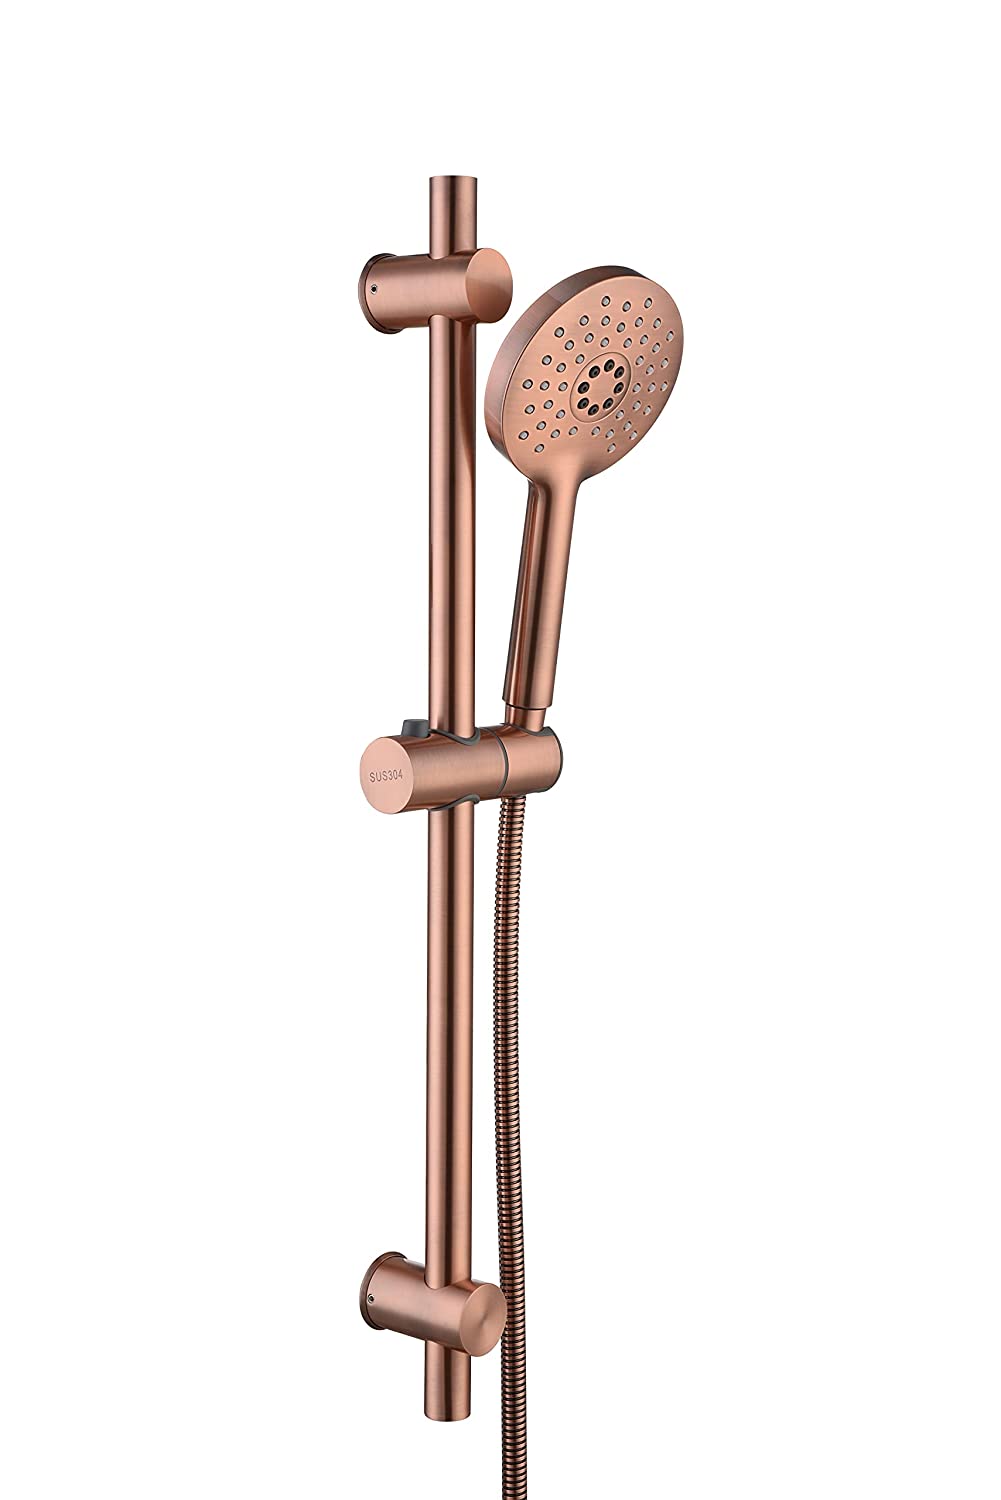 Parryware Night Life Hand Shower T4931A6 Red Copper